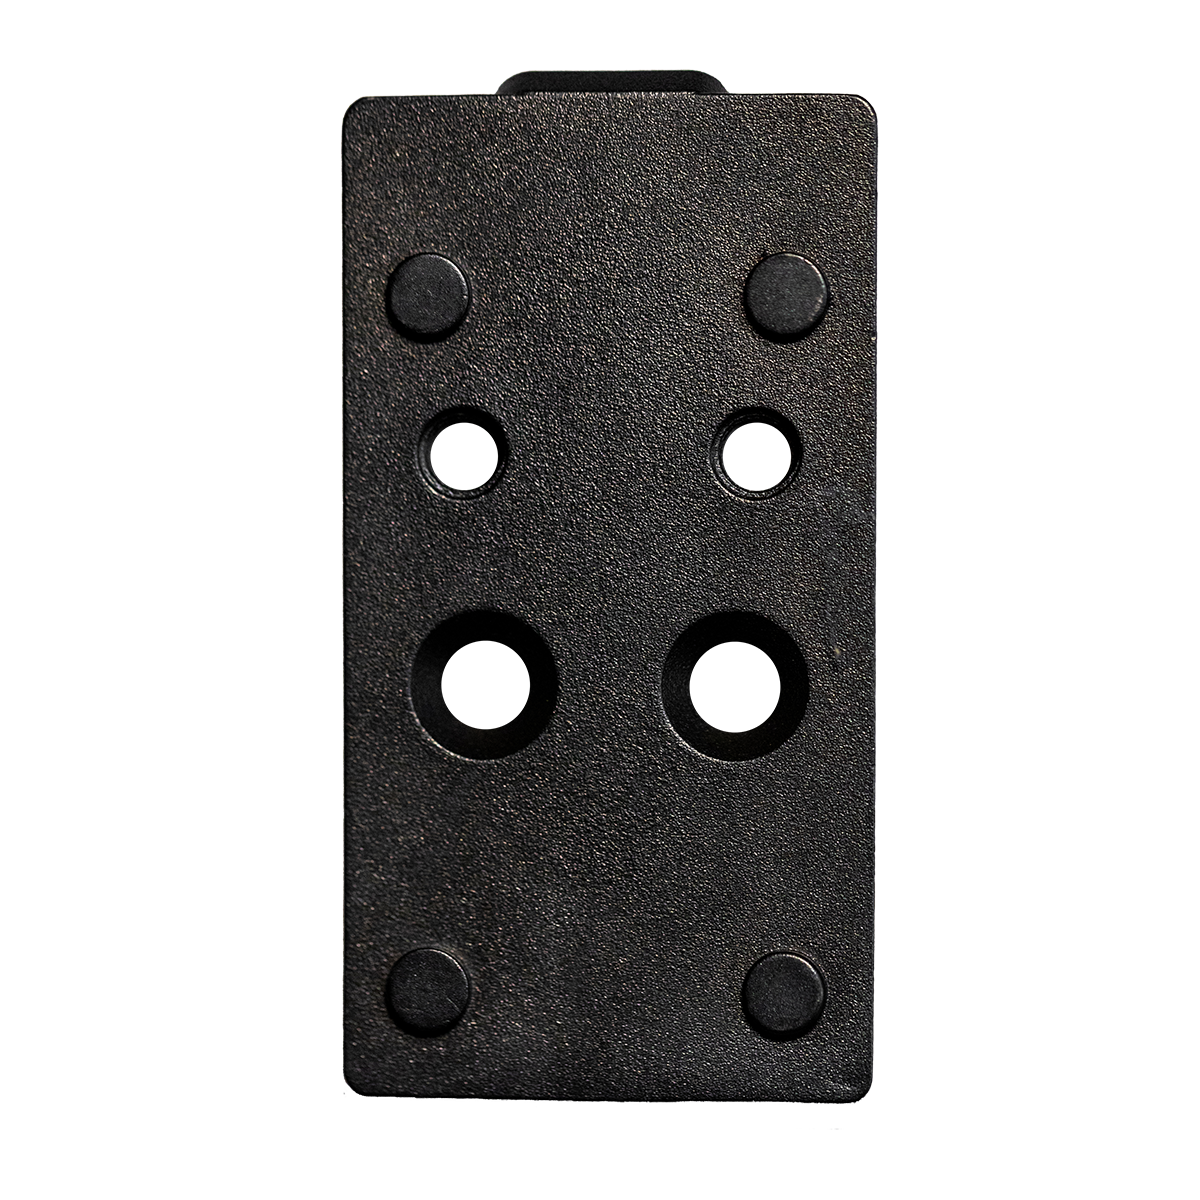 Product: Leupold DeltaPoint Pro Metal Optic Plate